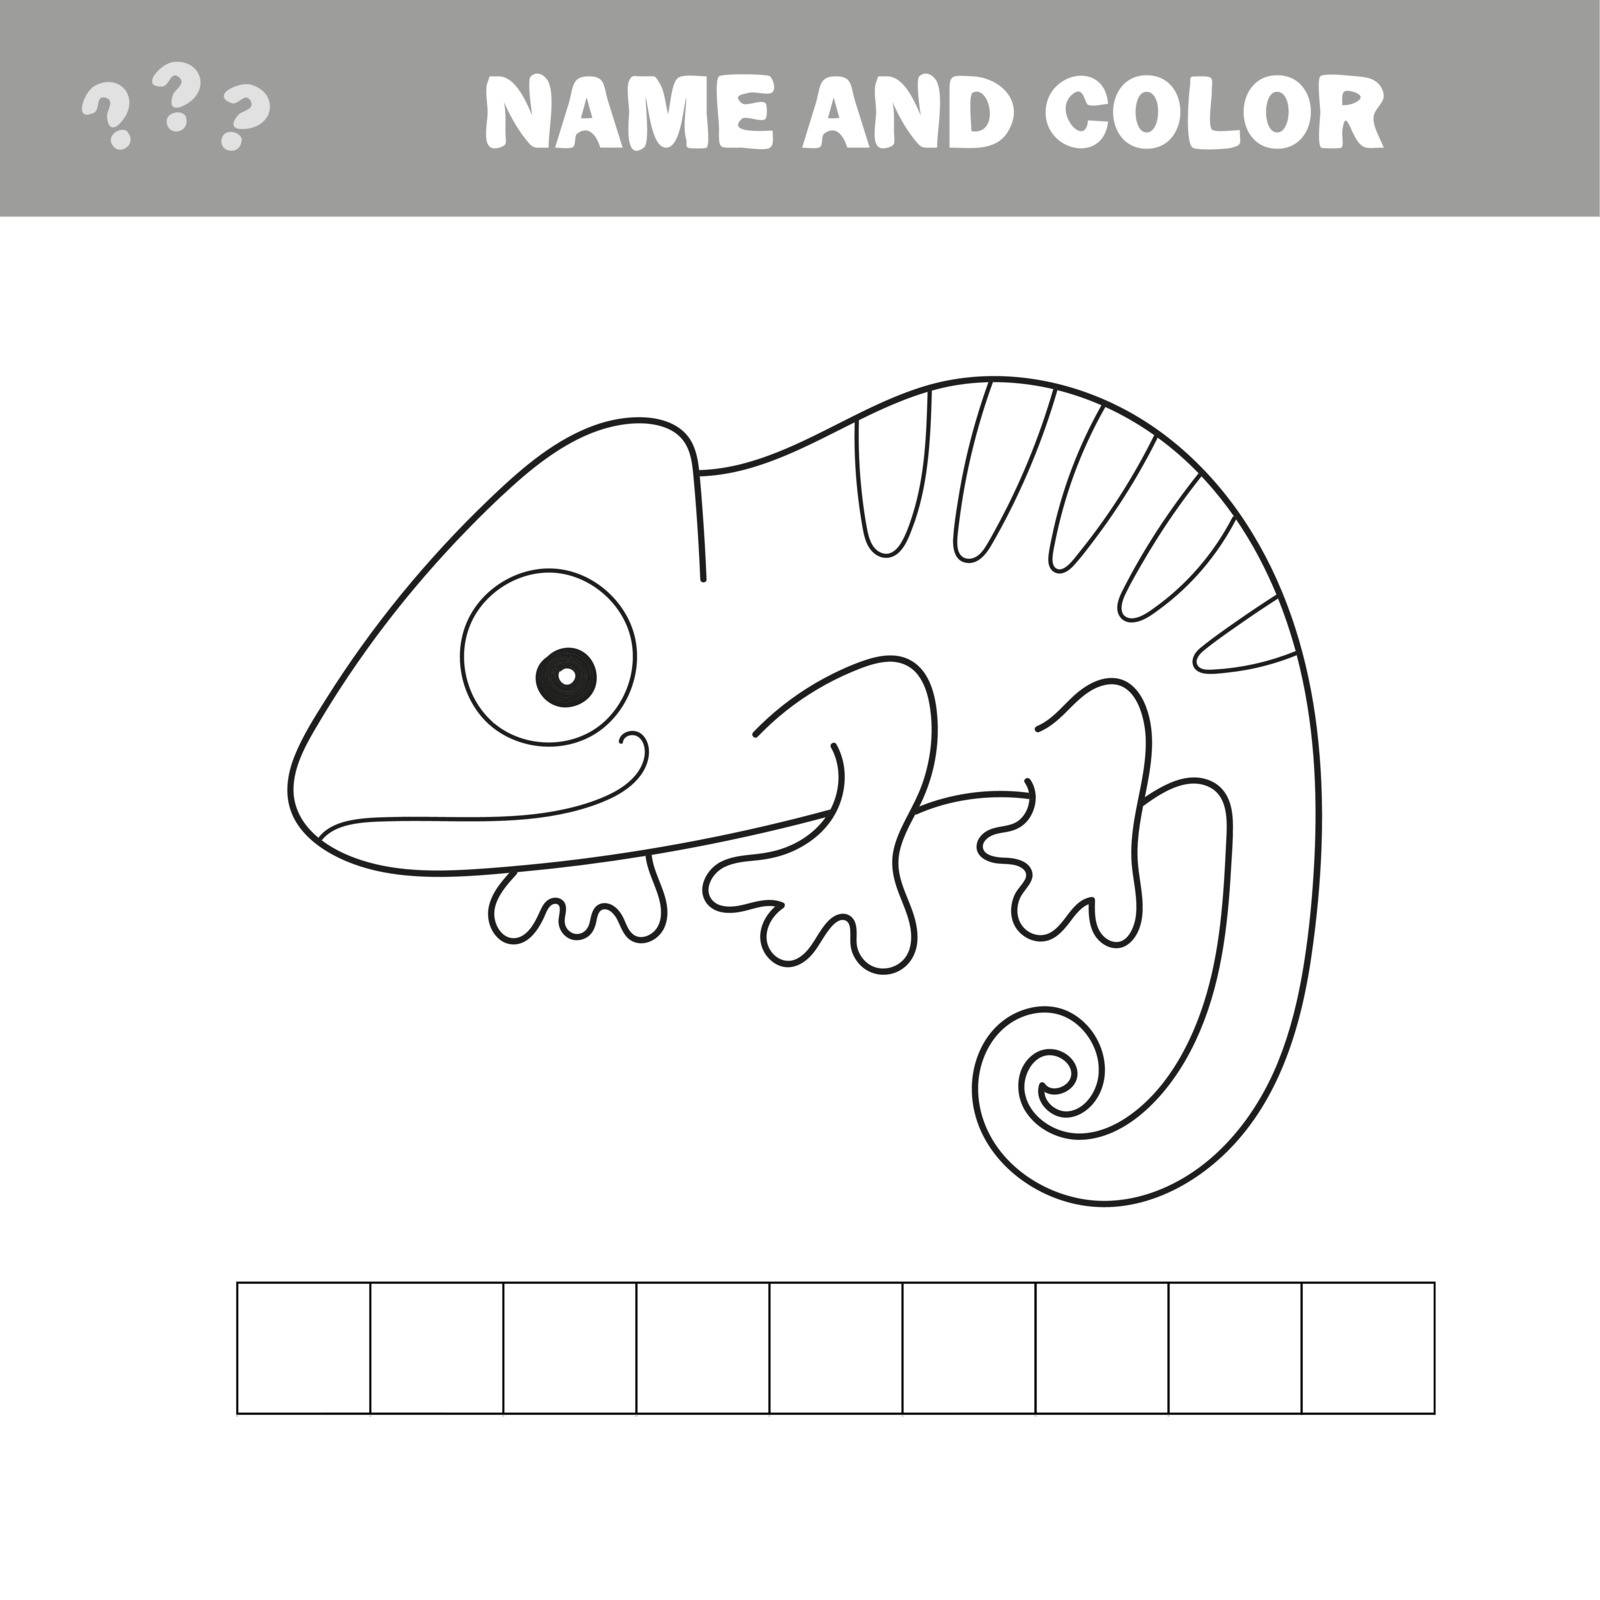 Iguana to be colored. Coloring book for children. Visual game. by natali_brill